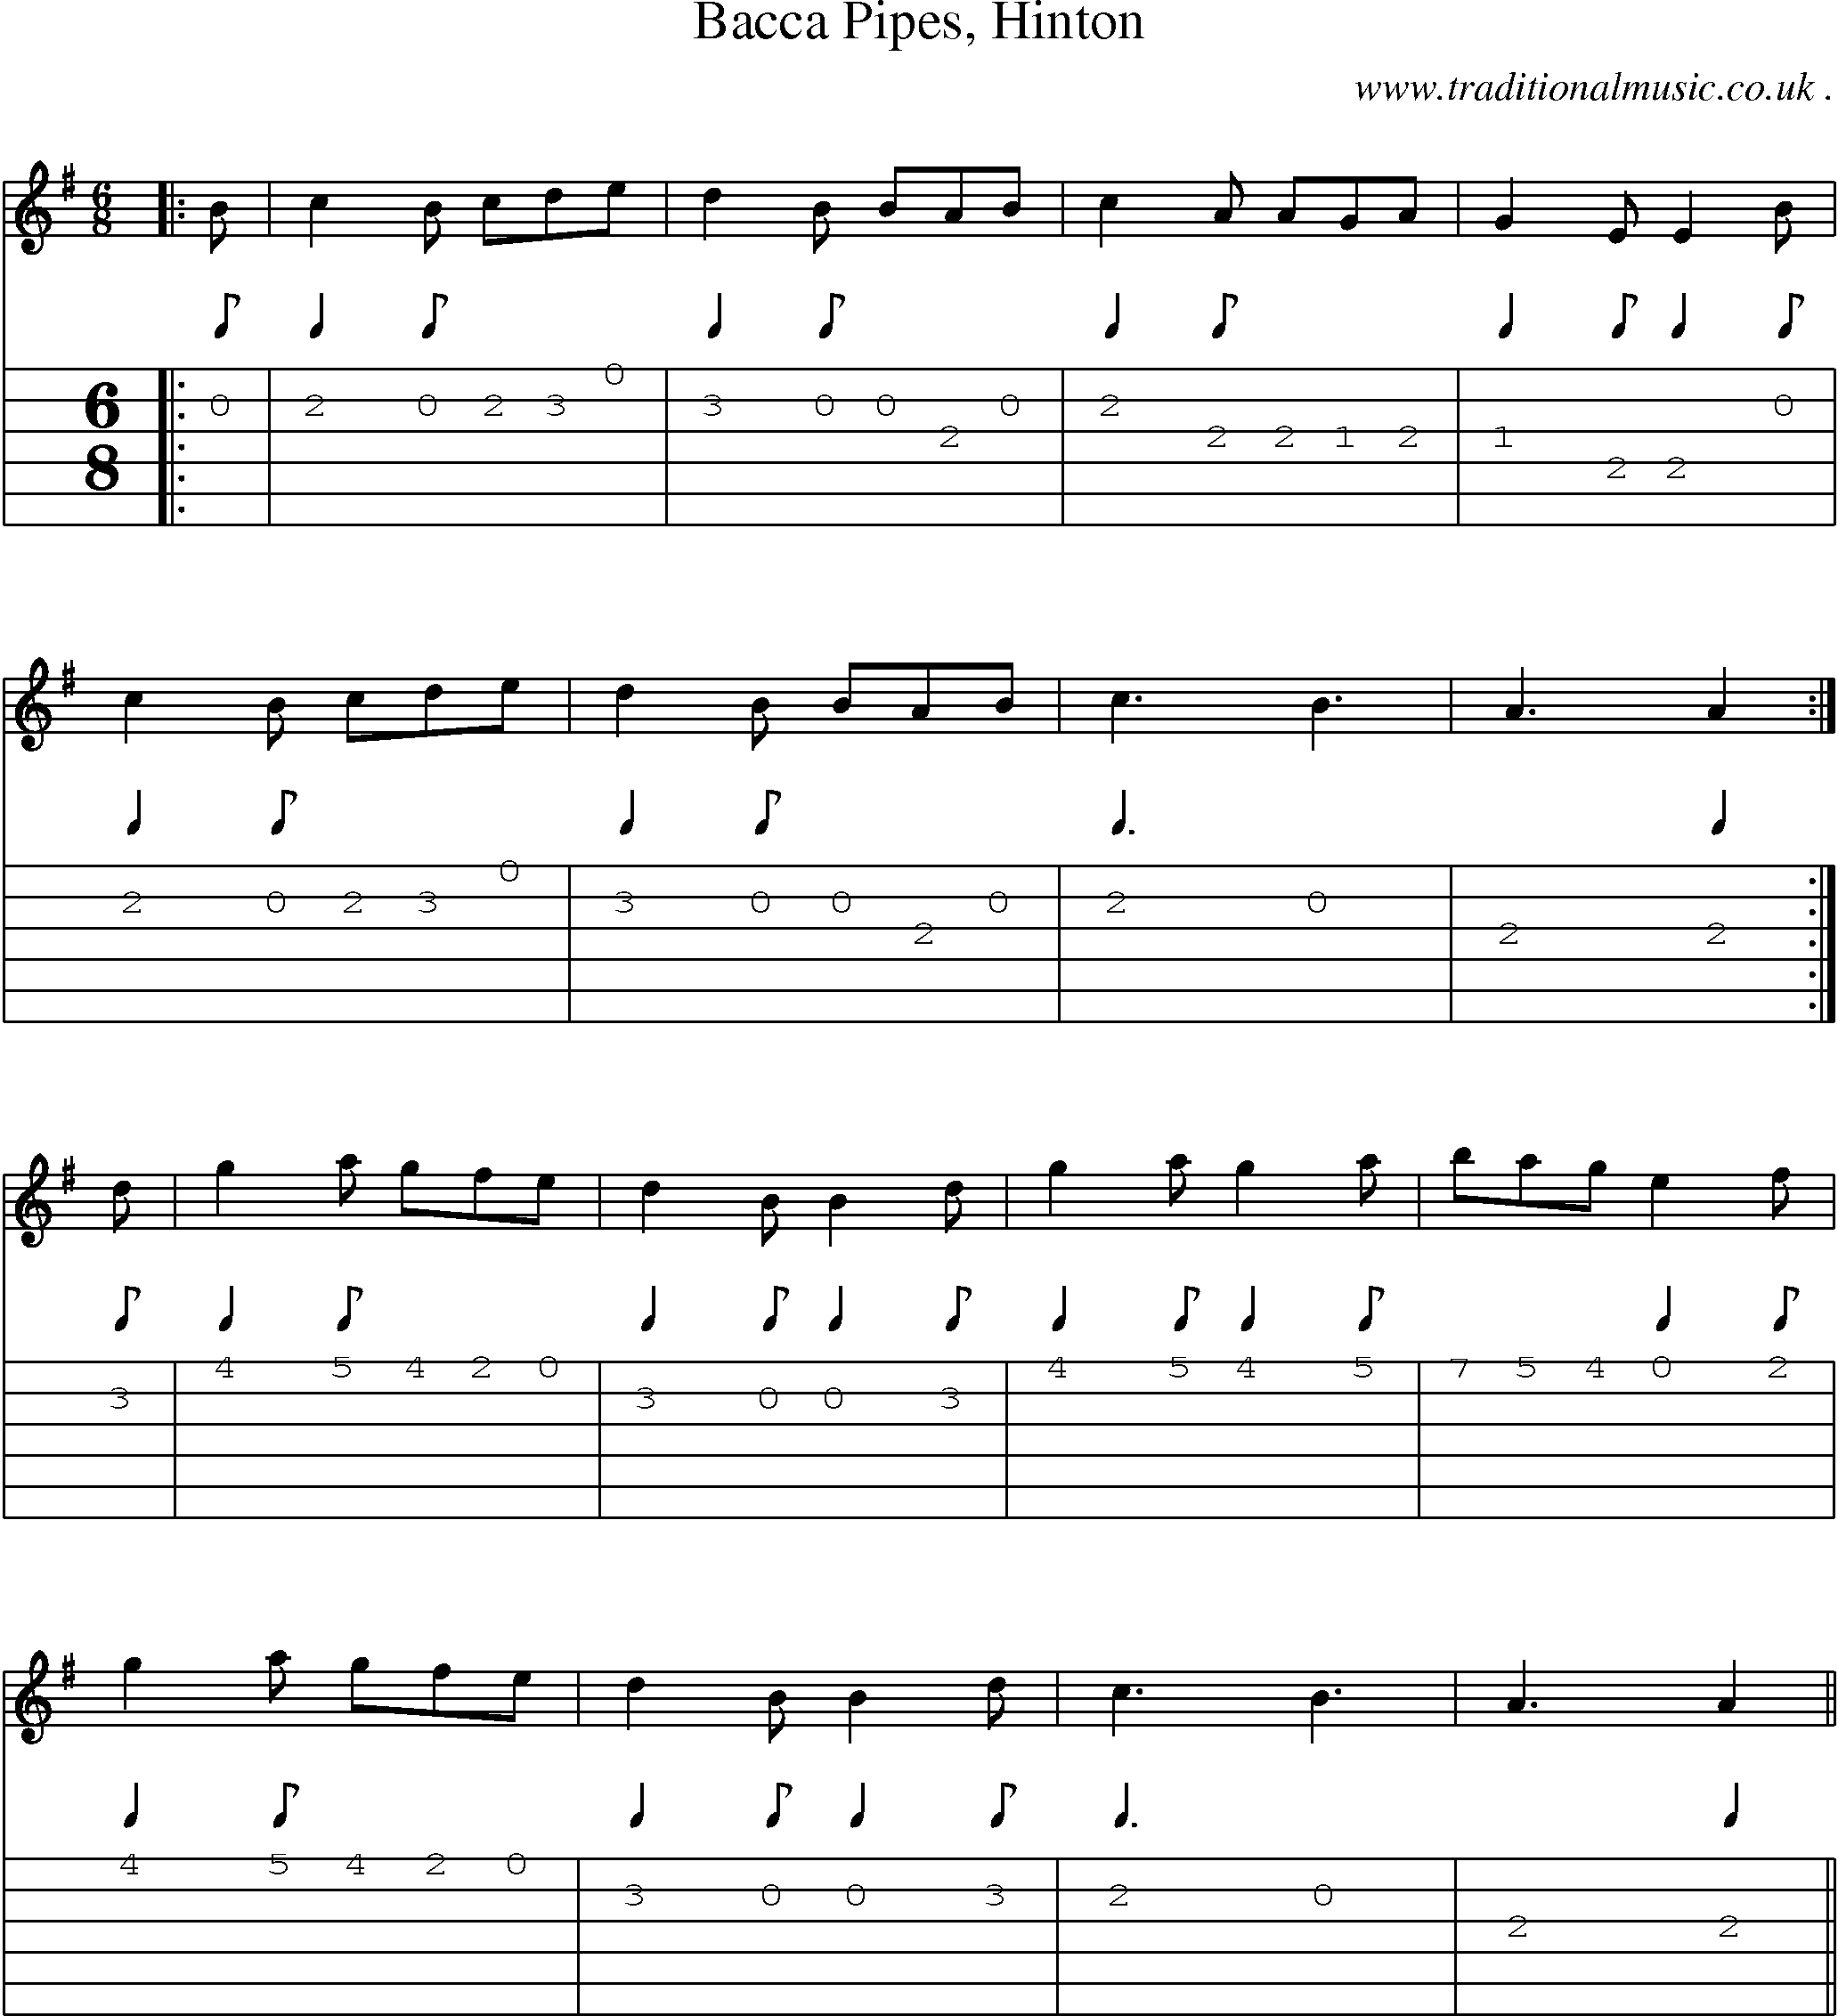 Sheet-Music and Guitar Tabs for Bacca Pipes Hinton